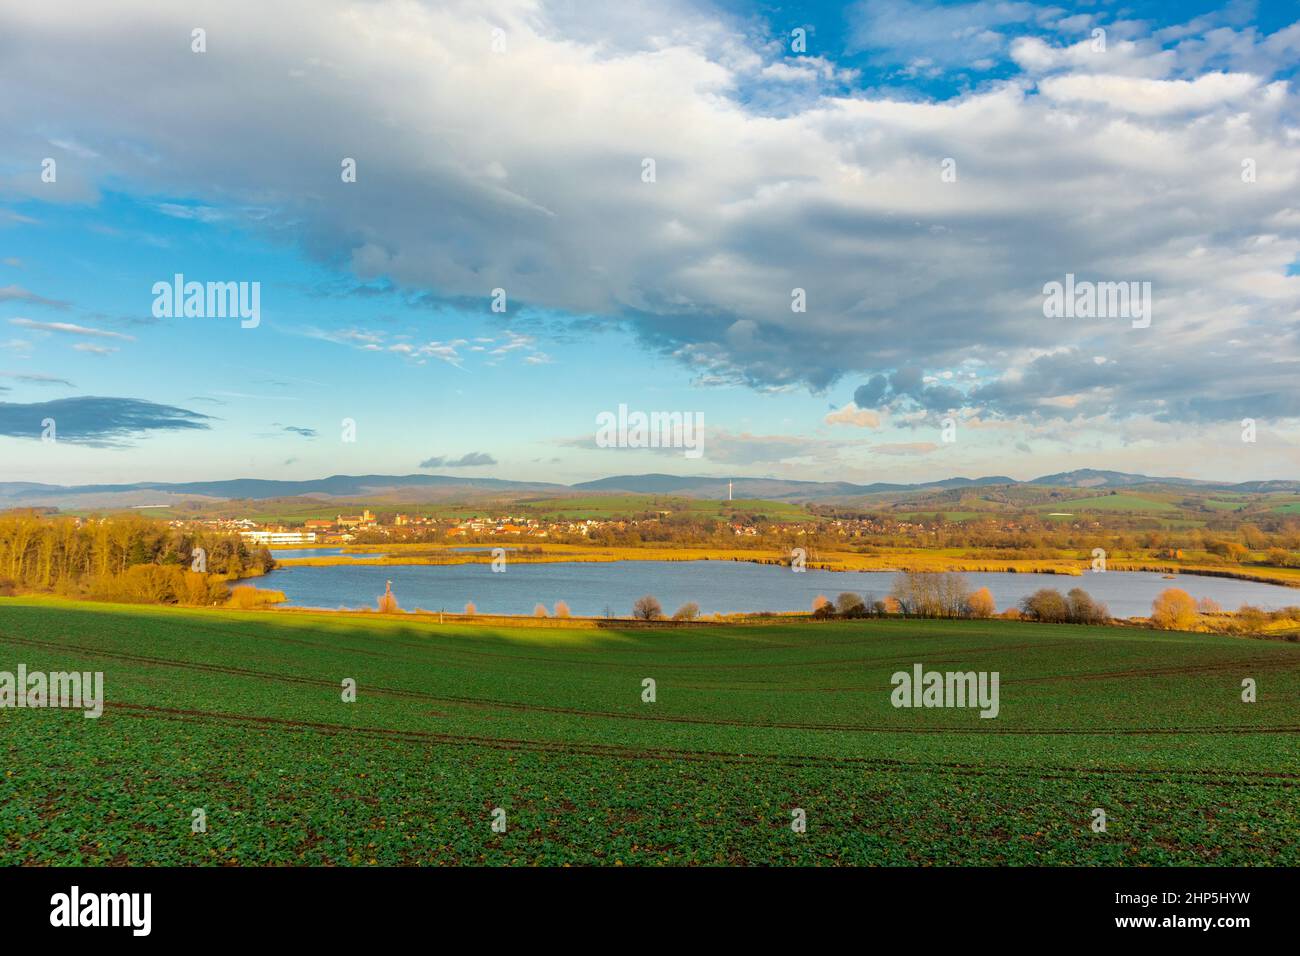 Beautiful view of greenfield near a lake in Werratal, Breitungen under a cloudy sky Stock Photo